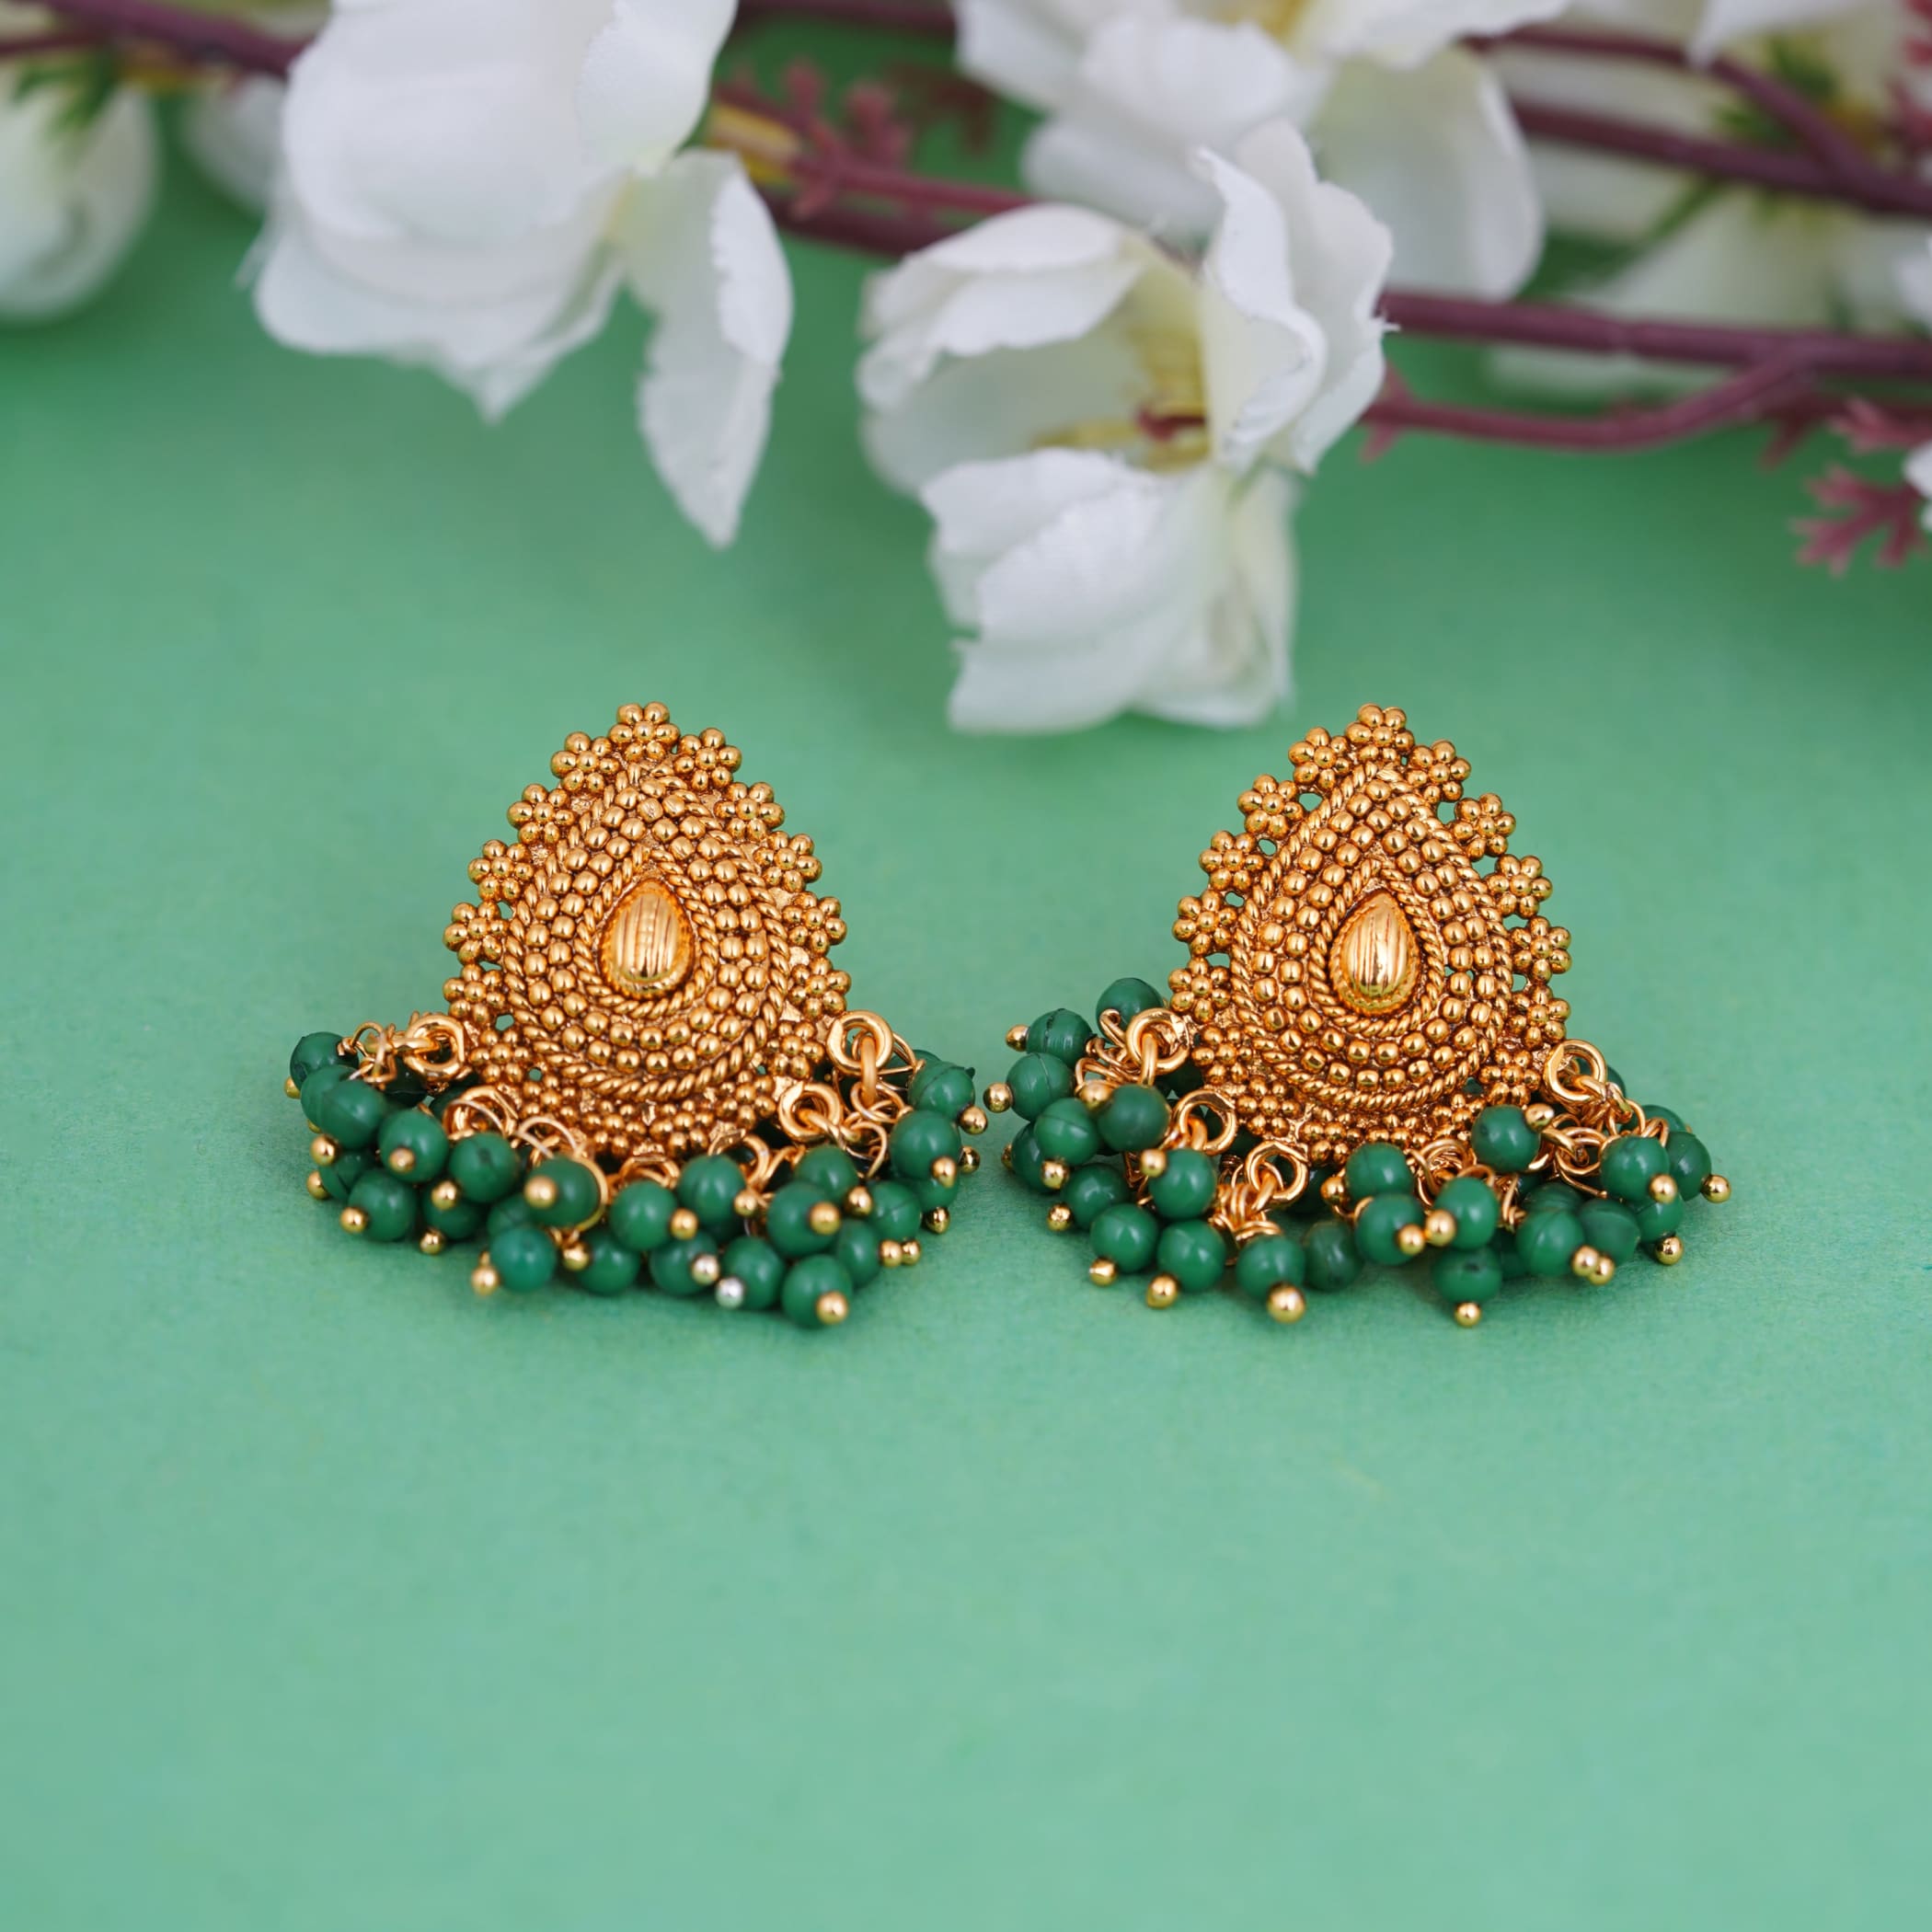 South Indian 22K Gold Plated Wedding Variations Different Jhumka Earrings  Set  eBay